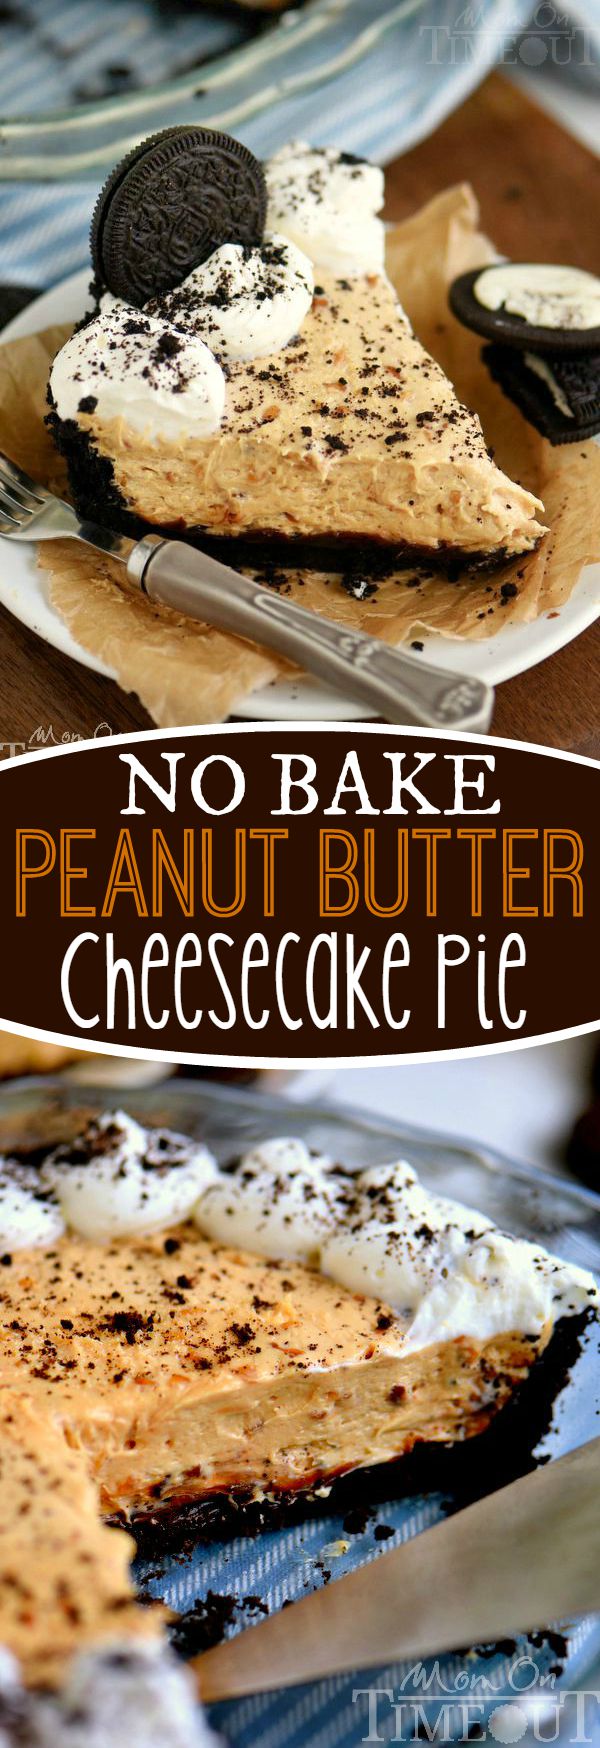 I've got an incredible No Bake Peanut Butter Cheesecake Pie recipe for you that just won't quit! See if you can eat just one slice! Creamy, crunchy, delightfully rich and no bake too! - all on an OREO crust!